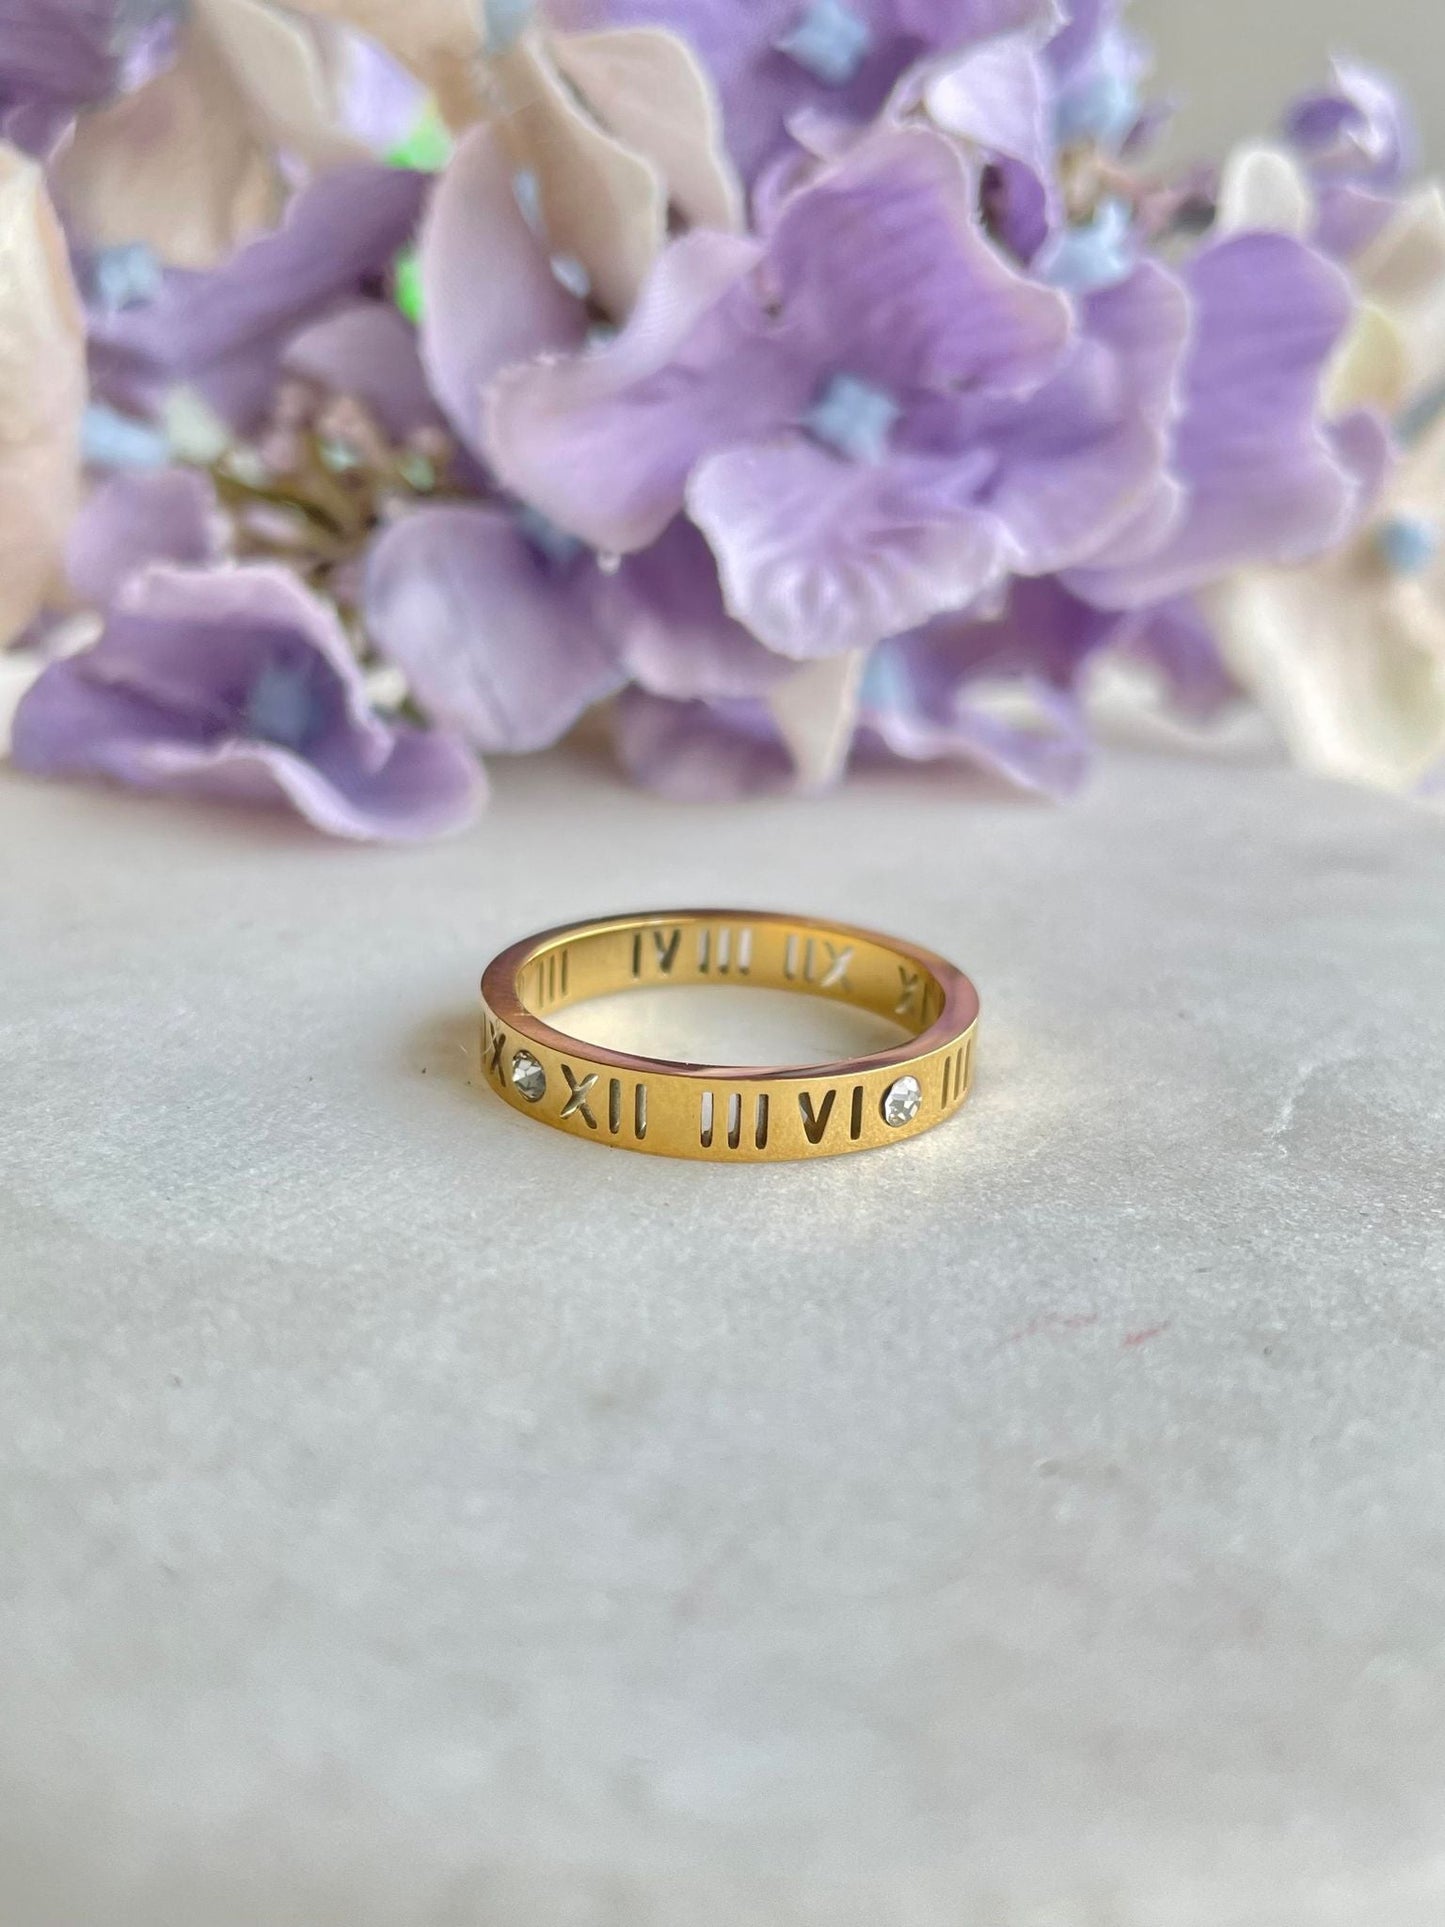 Roman numeral gold ring - Size 7 - Gold Plated Tarnish Free Jewellery